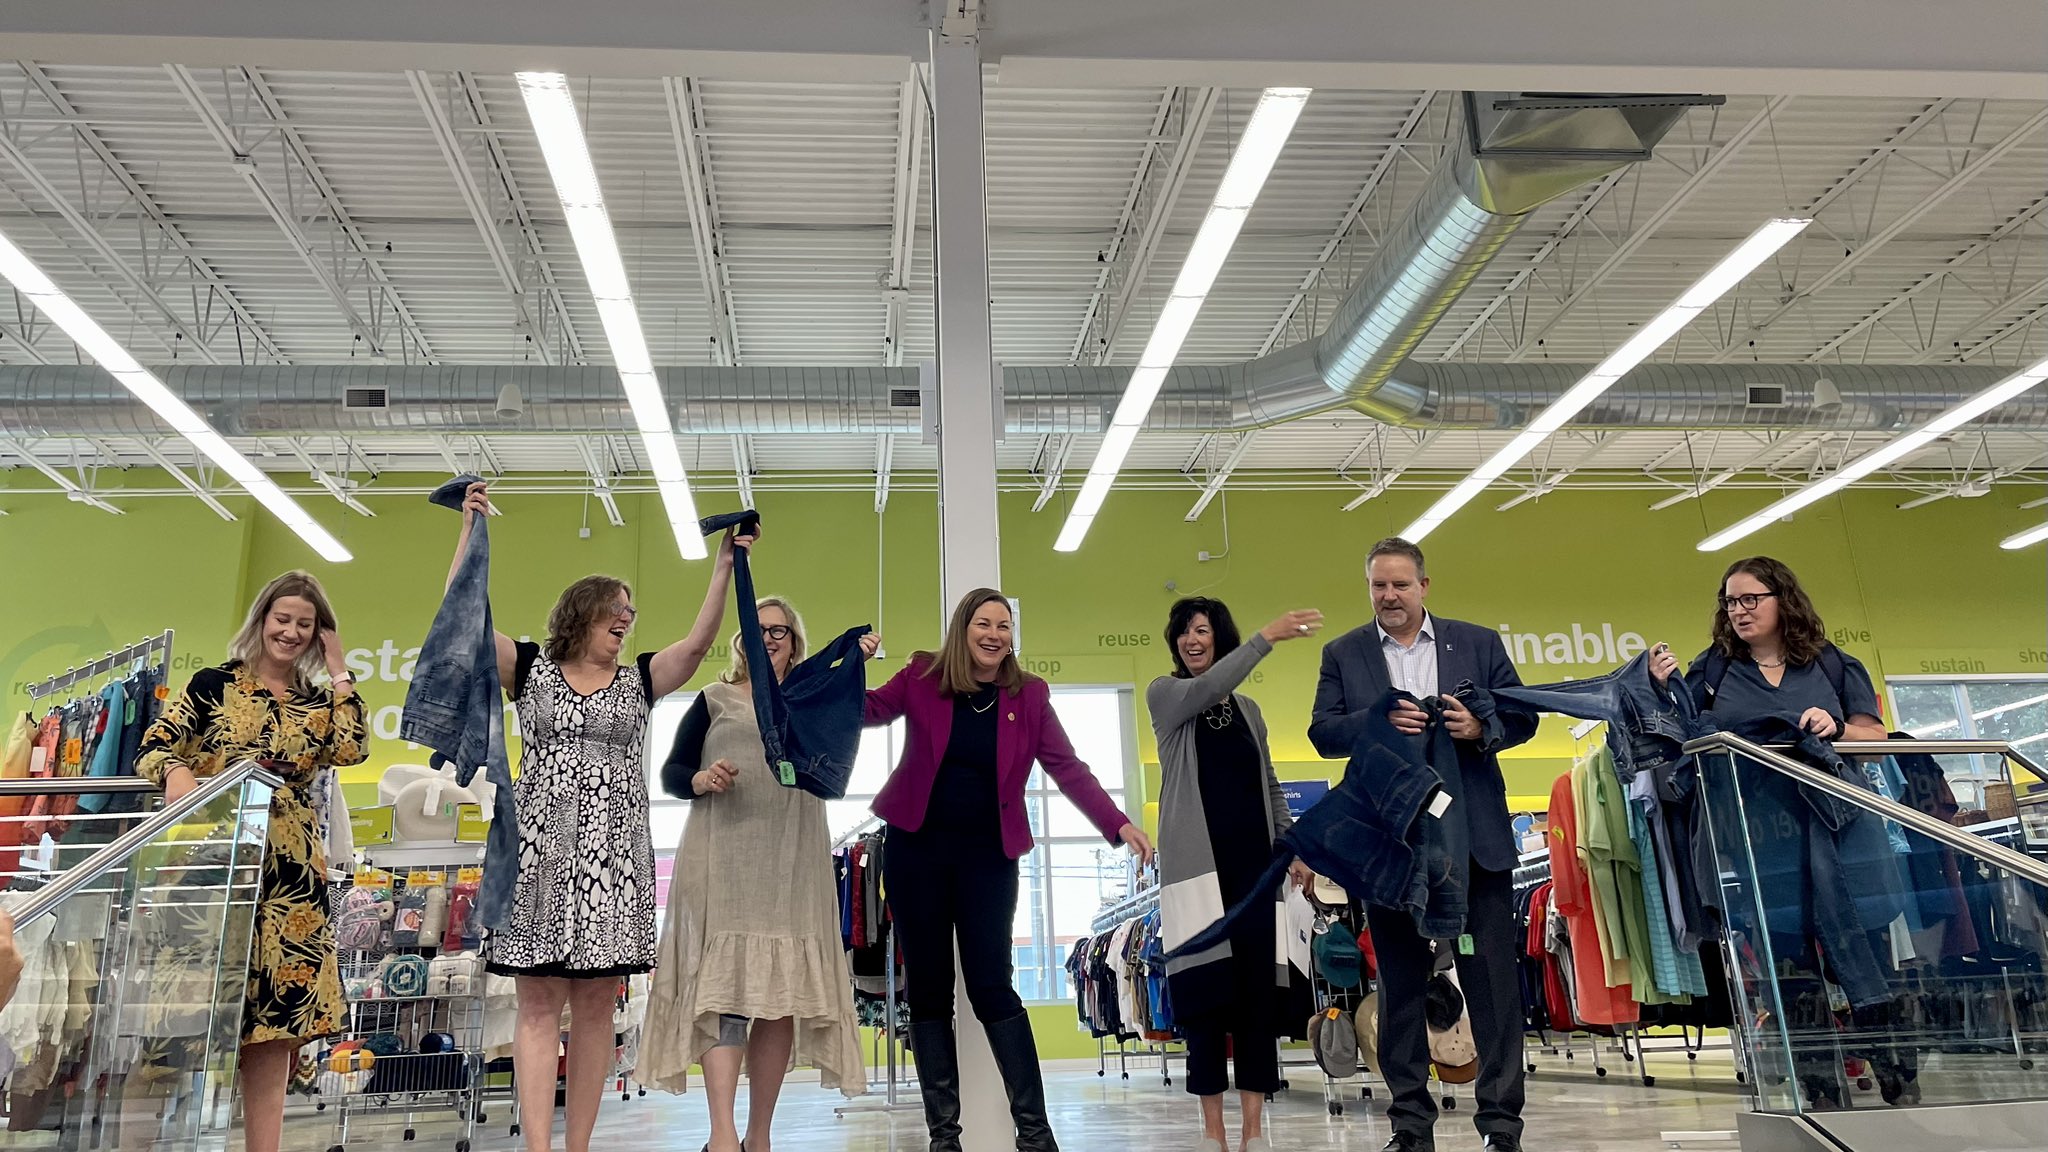 MPP Catherine Fife on X: What a crowd this morning at the Grand Opening of  the new Goodwill Community Store in Waterloo! Welcome to the community!  #kwawesome @Goodwill_OGL @gwmichelle  / X